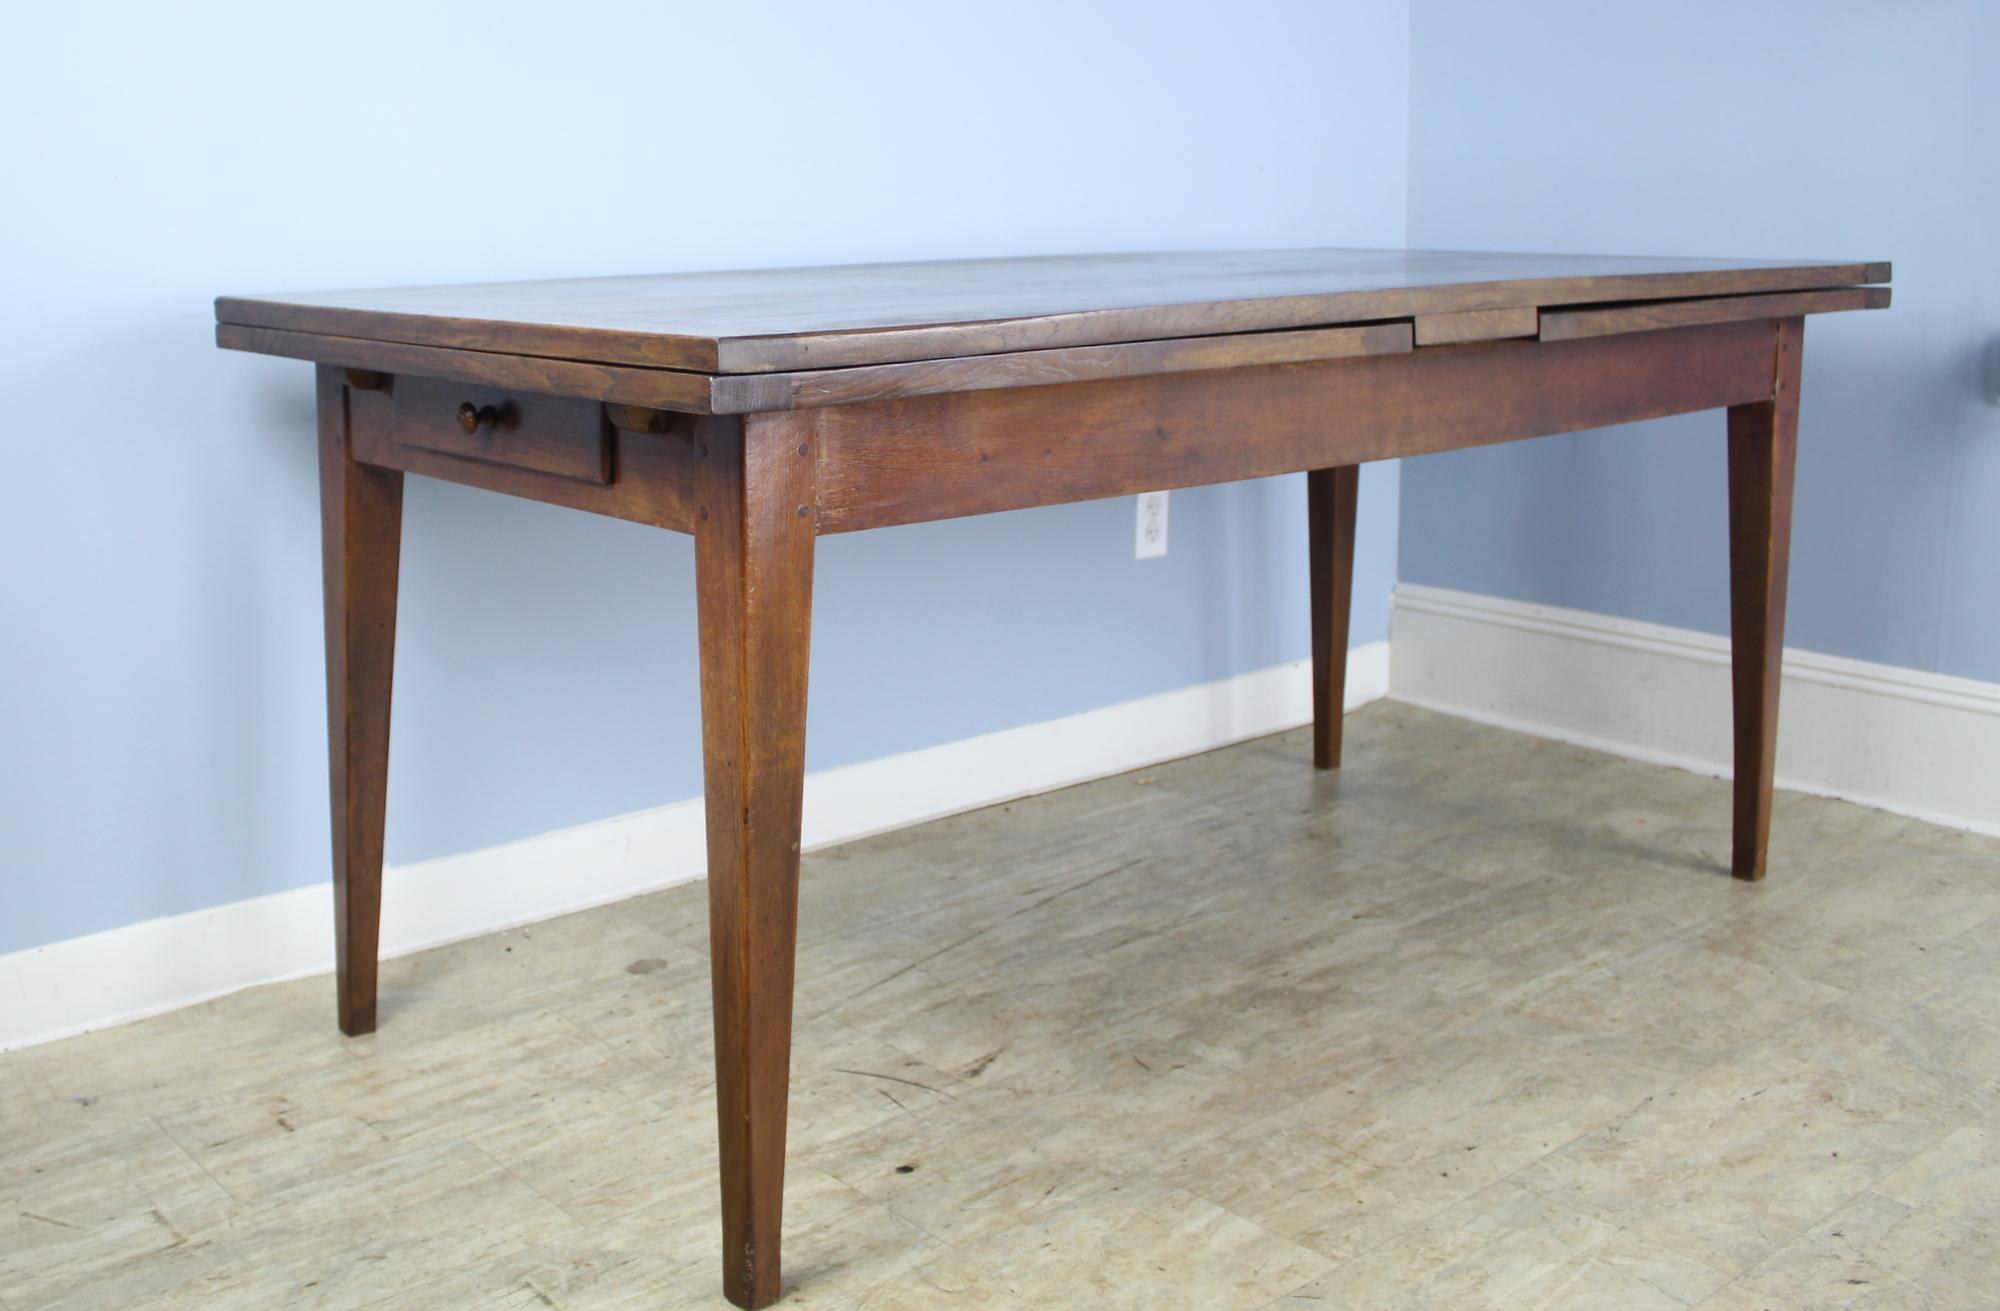 A pretty oak and chestnut dining or farm table from France, with Classic design details -tapered legs and a single drawer at one end - with a twist! This table extends to 132.5 inches - over 11 feet long, when both 31 inch draw leaves are extended.